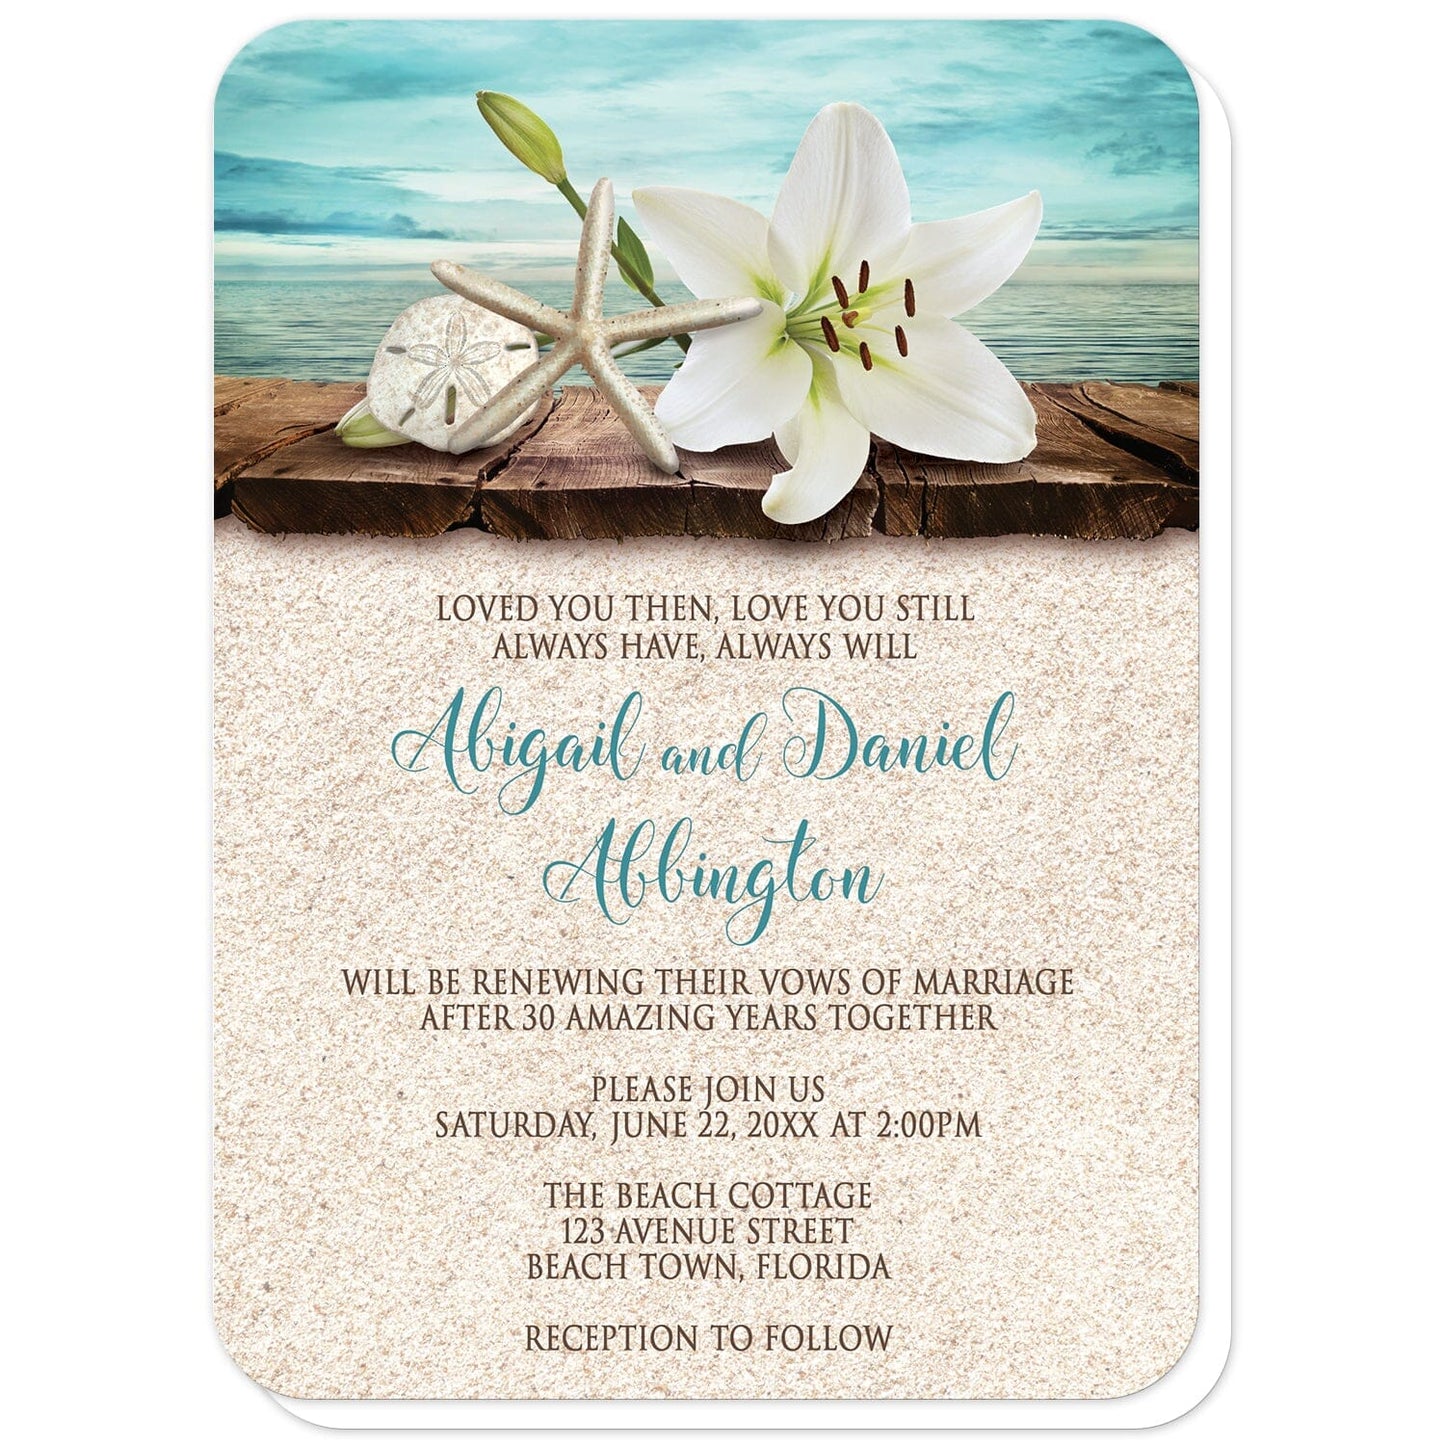 Lily Seashells and Sand Beach Vow Renewal Invitations (with rounded corners) at Artistically Invited. Tropical invites with an elegant white lily, a starfish, and a sand dollar on a rustic wood dock overlooking the open water. These tropical lily invitations are fully illustrated in a beach color scheme of teal and turquoise, beige, and brown. Your personalized vow renewal celebration details are custom printed in dark brown and teal over a beige sand background design.